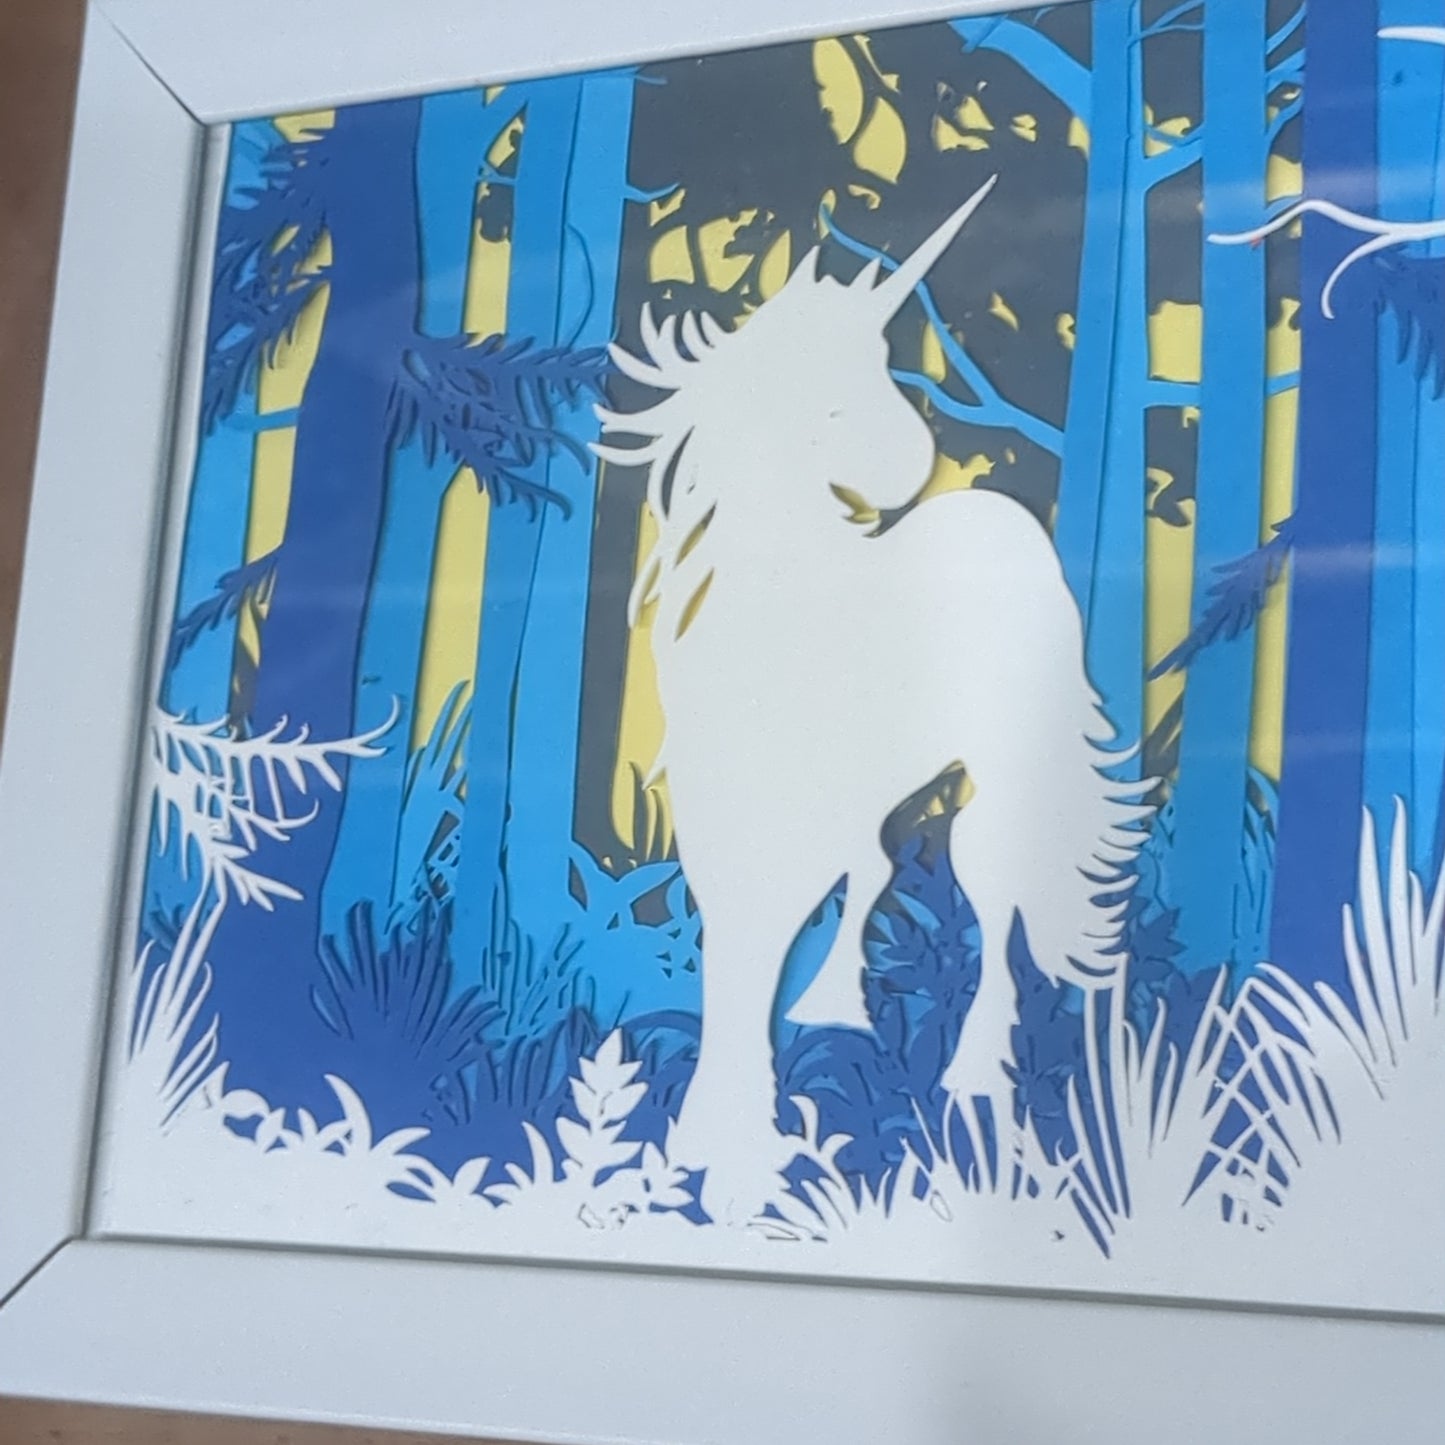 Roughly 5 x 6” white shadow box with paper cut unicorn in Forest serene